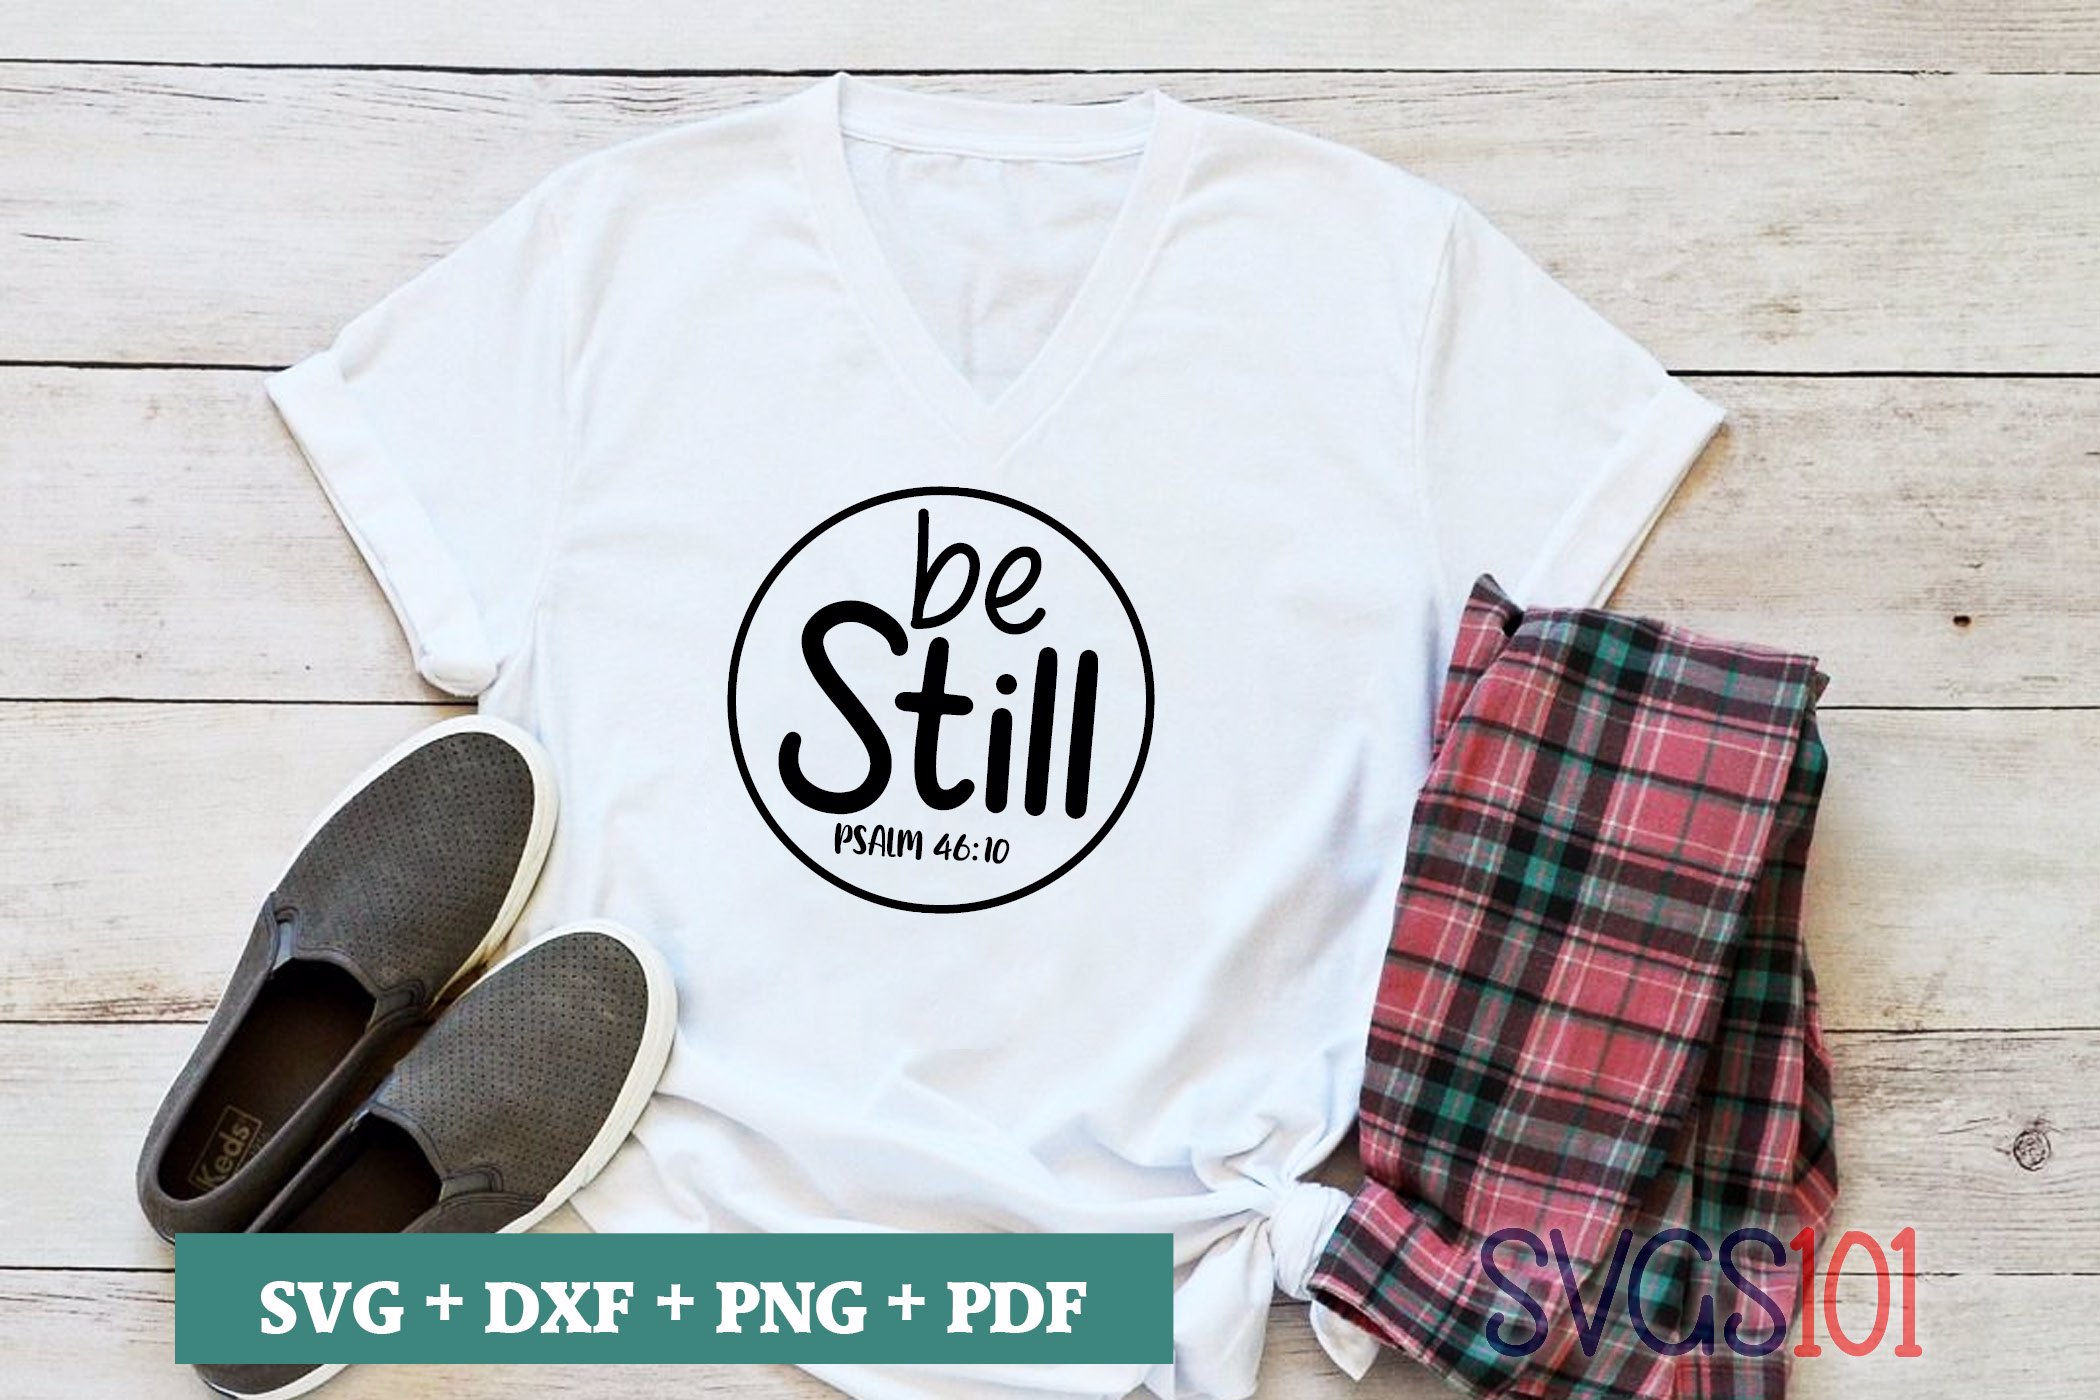 Be Still SVG Cuttable file - DXF, EPS, PNG, PDF | SVG Cutting File